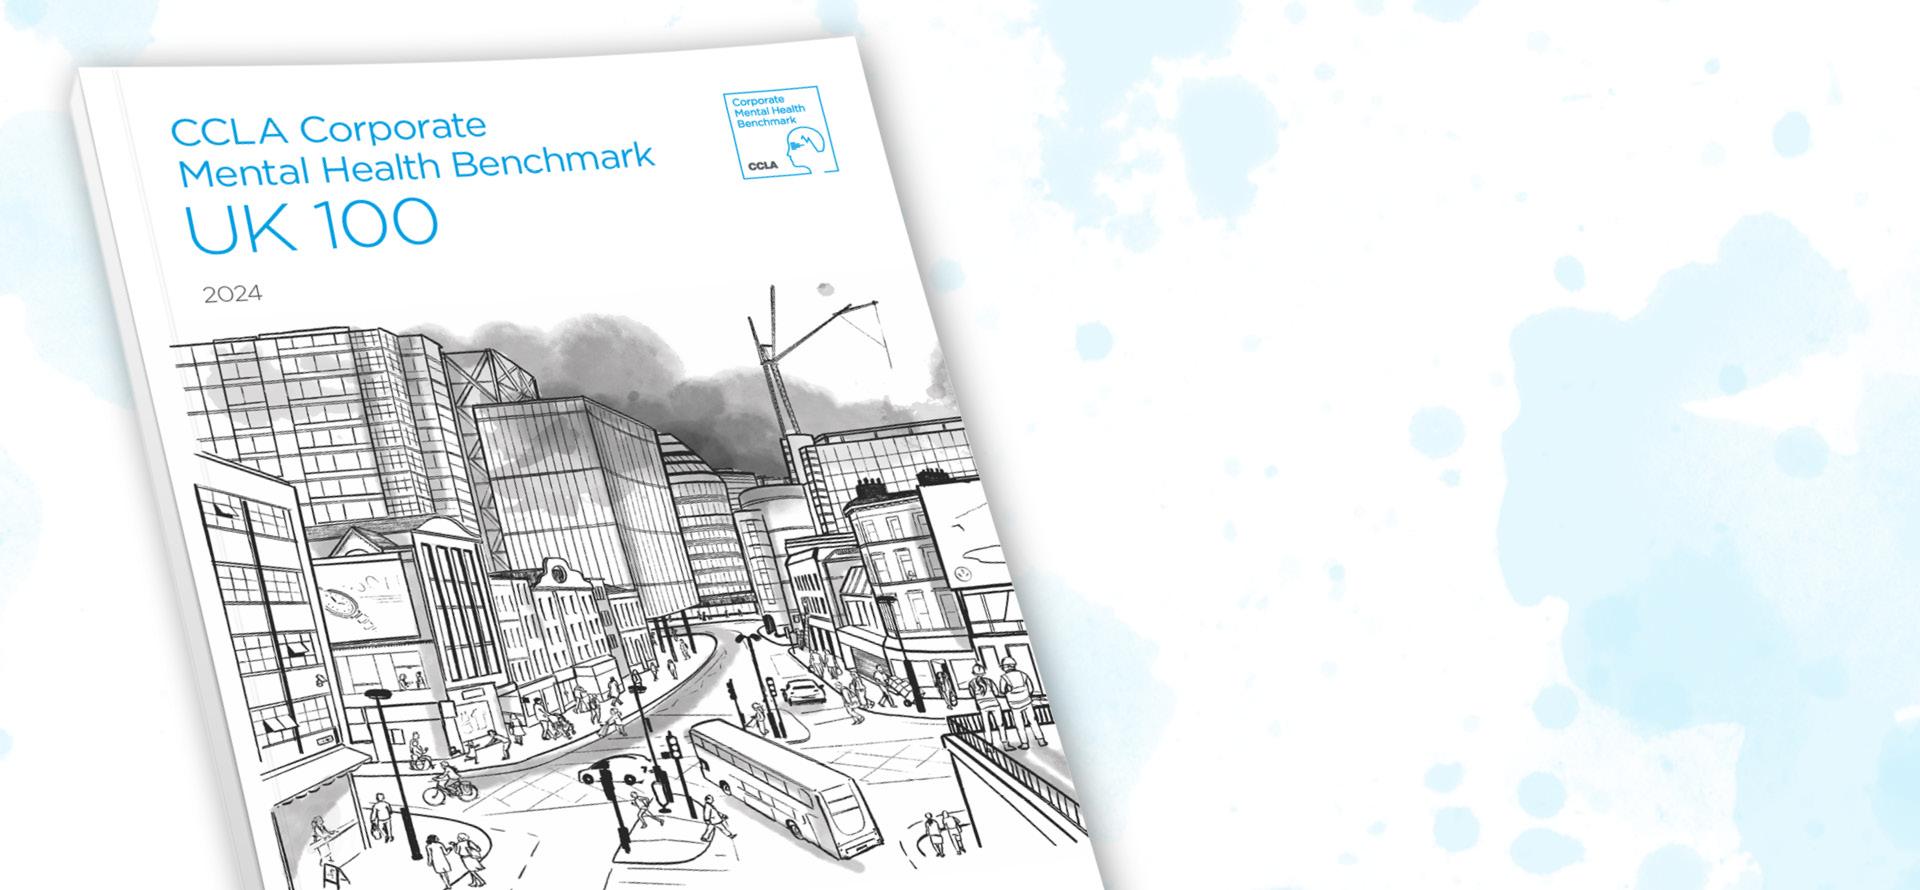 Mental health benchmark cityscape cover image